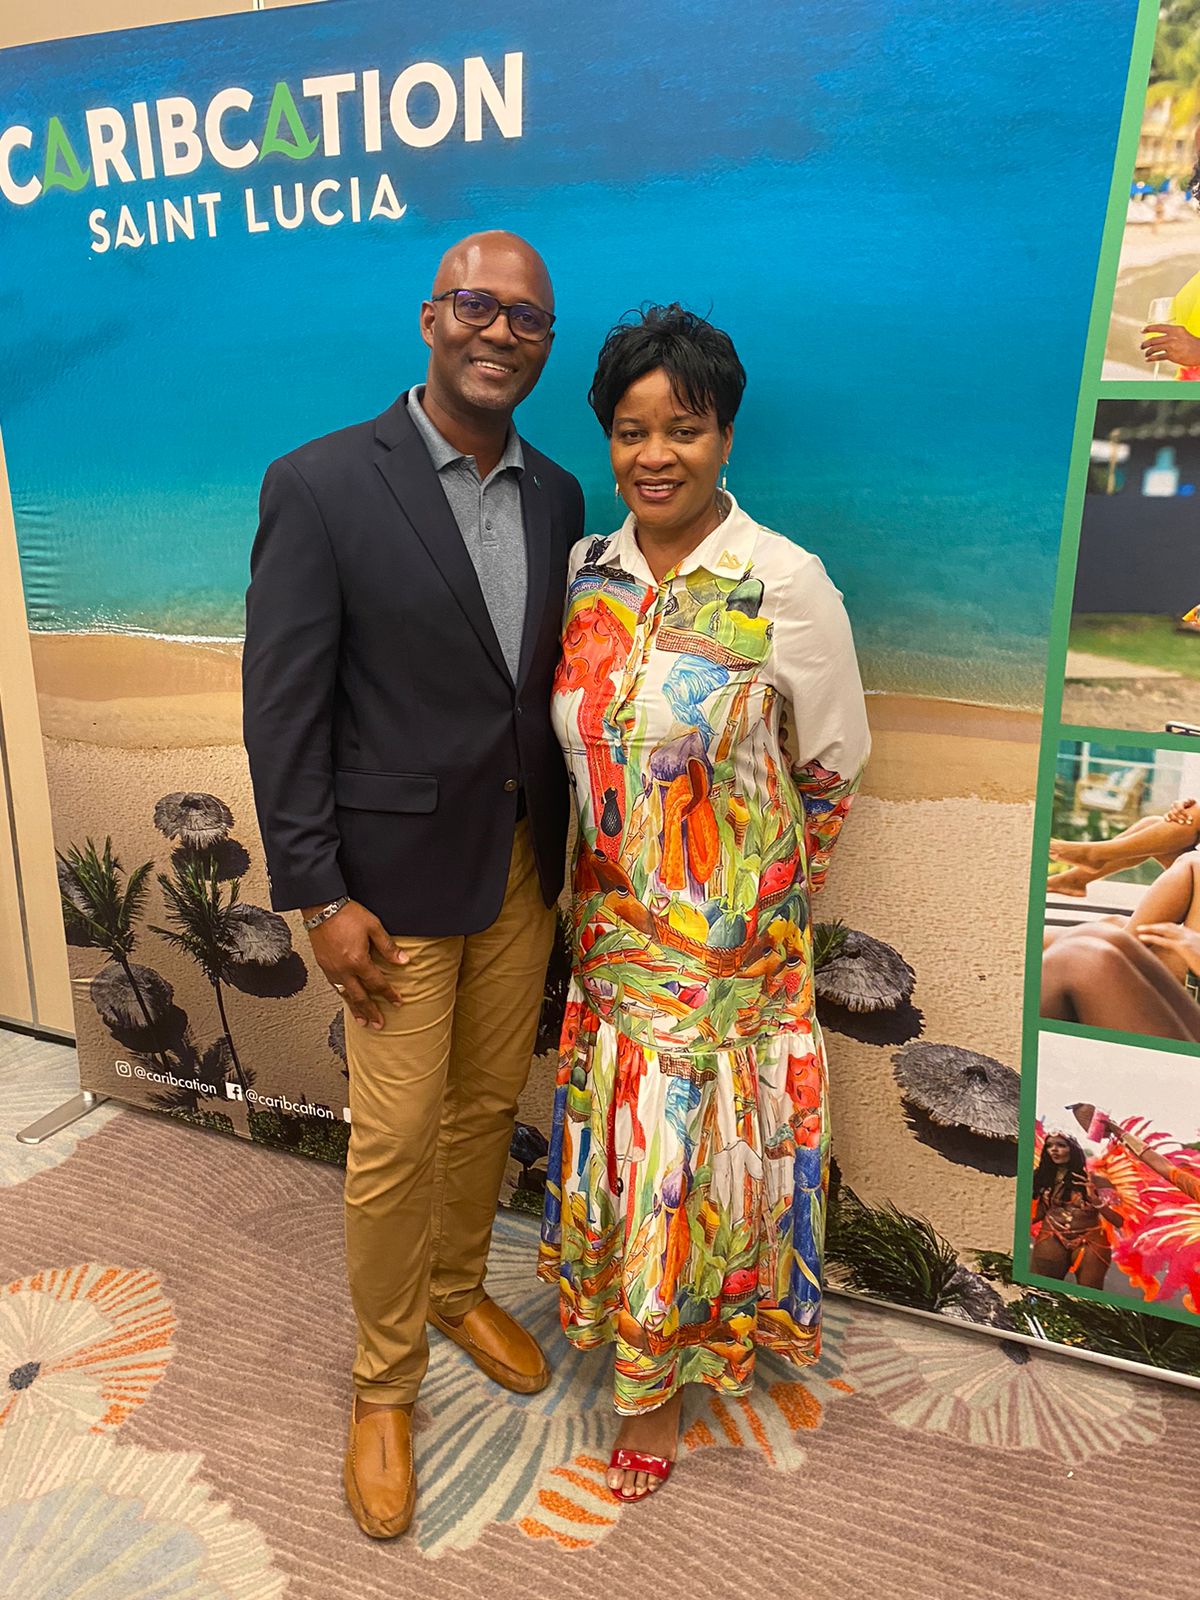 GCCI attends ‘CARIBCATION SAINT LUCIA’ event at the Marriott Hotel